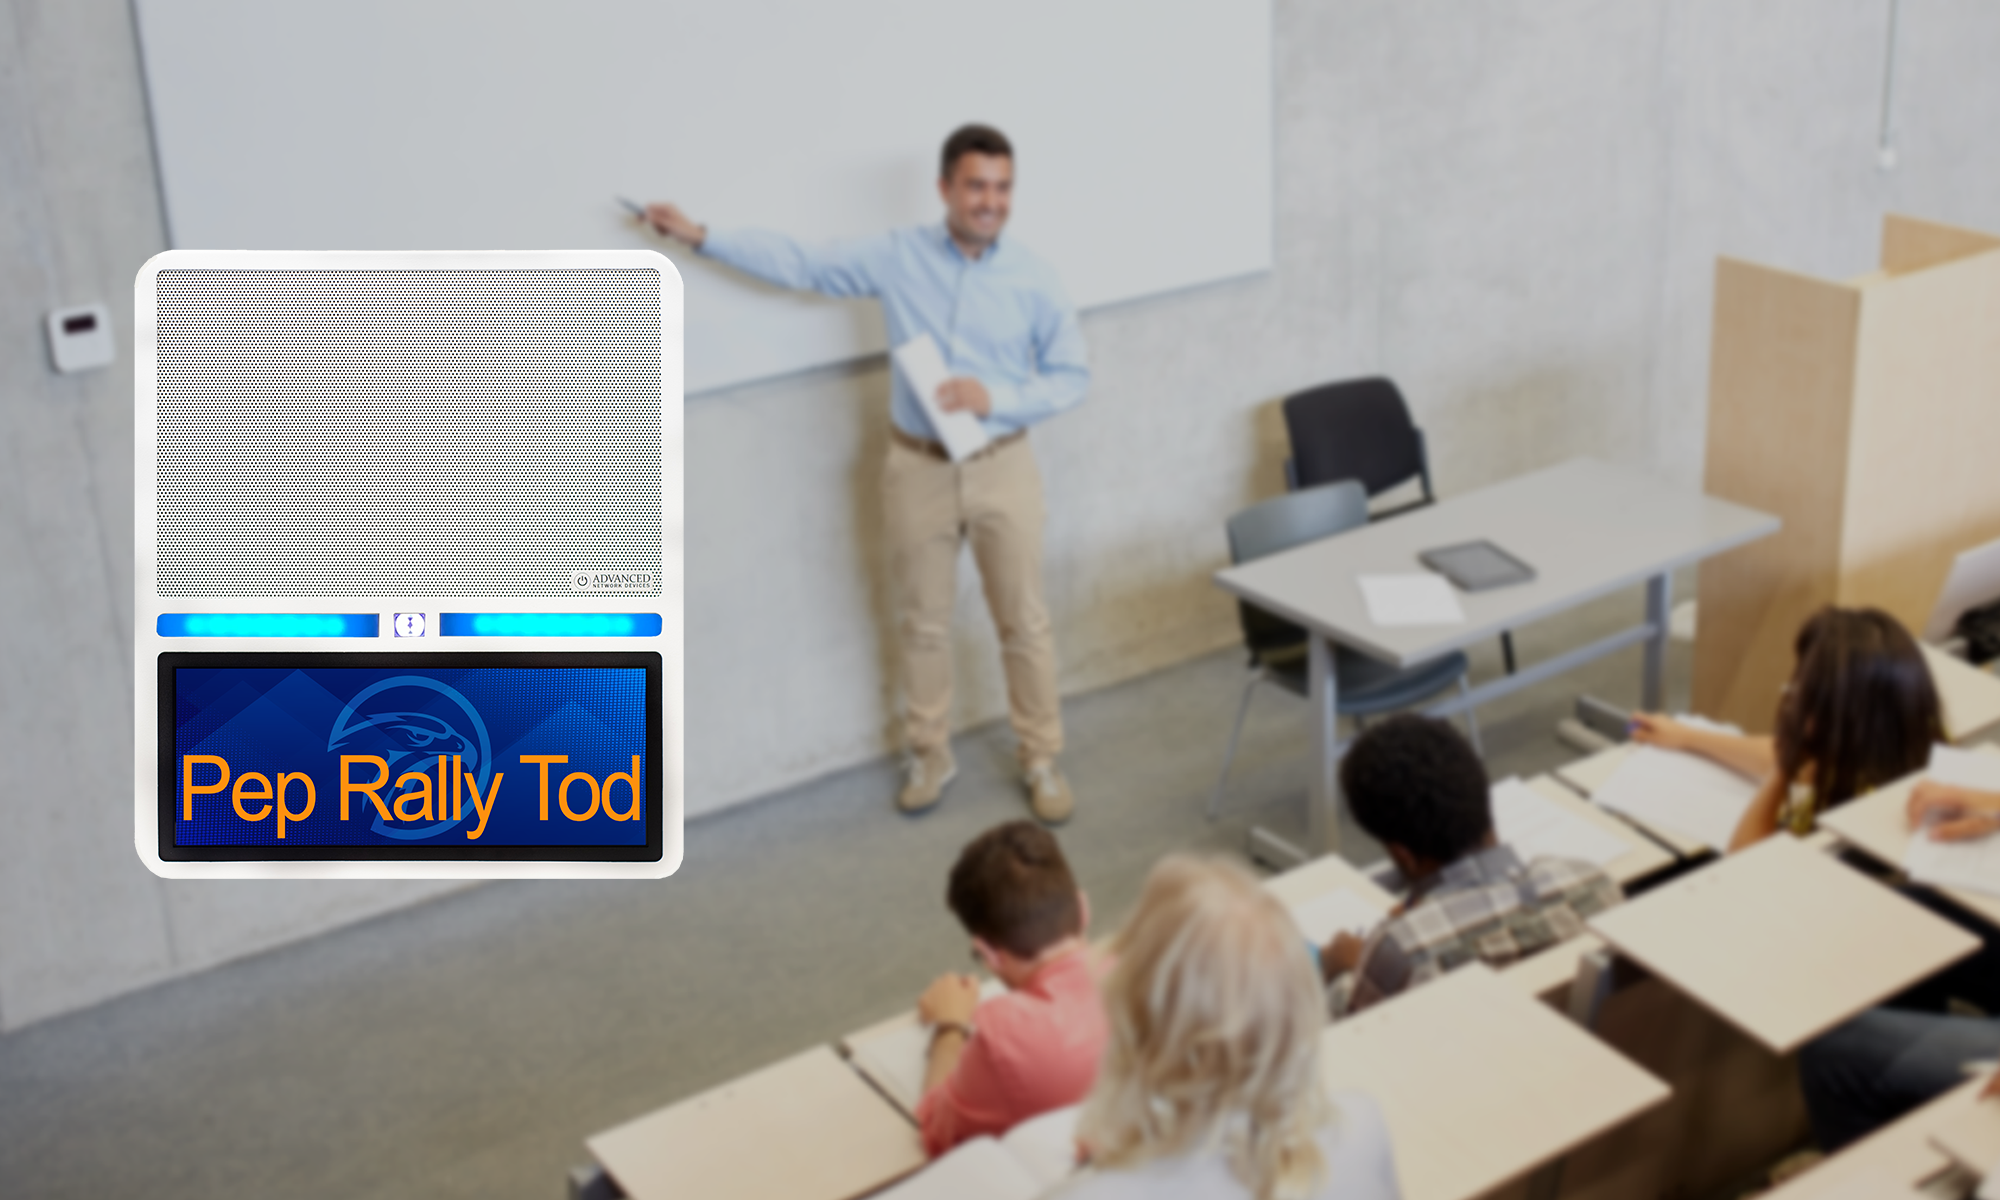 education-messaging-on-ip-speaker-with-hd-display